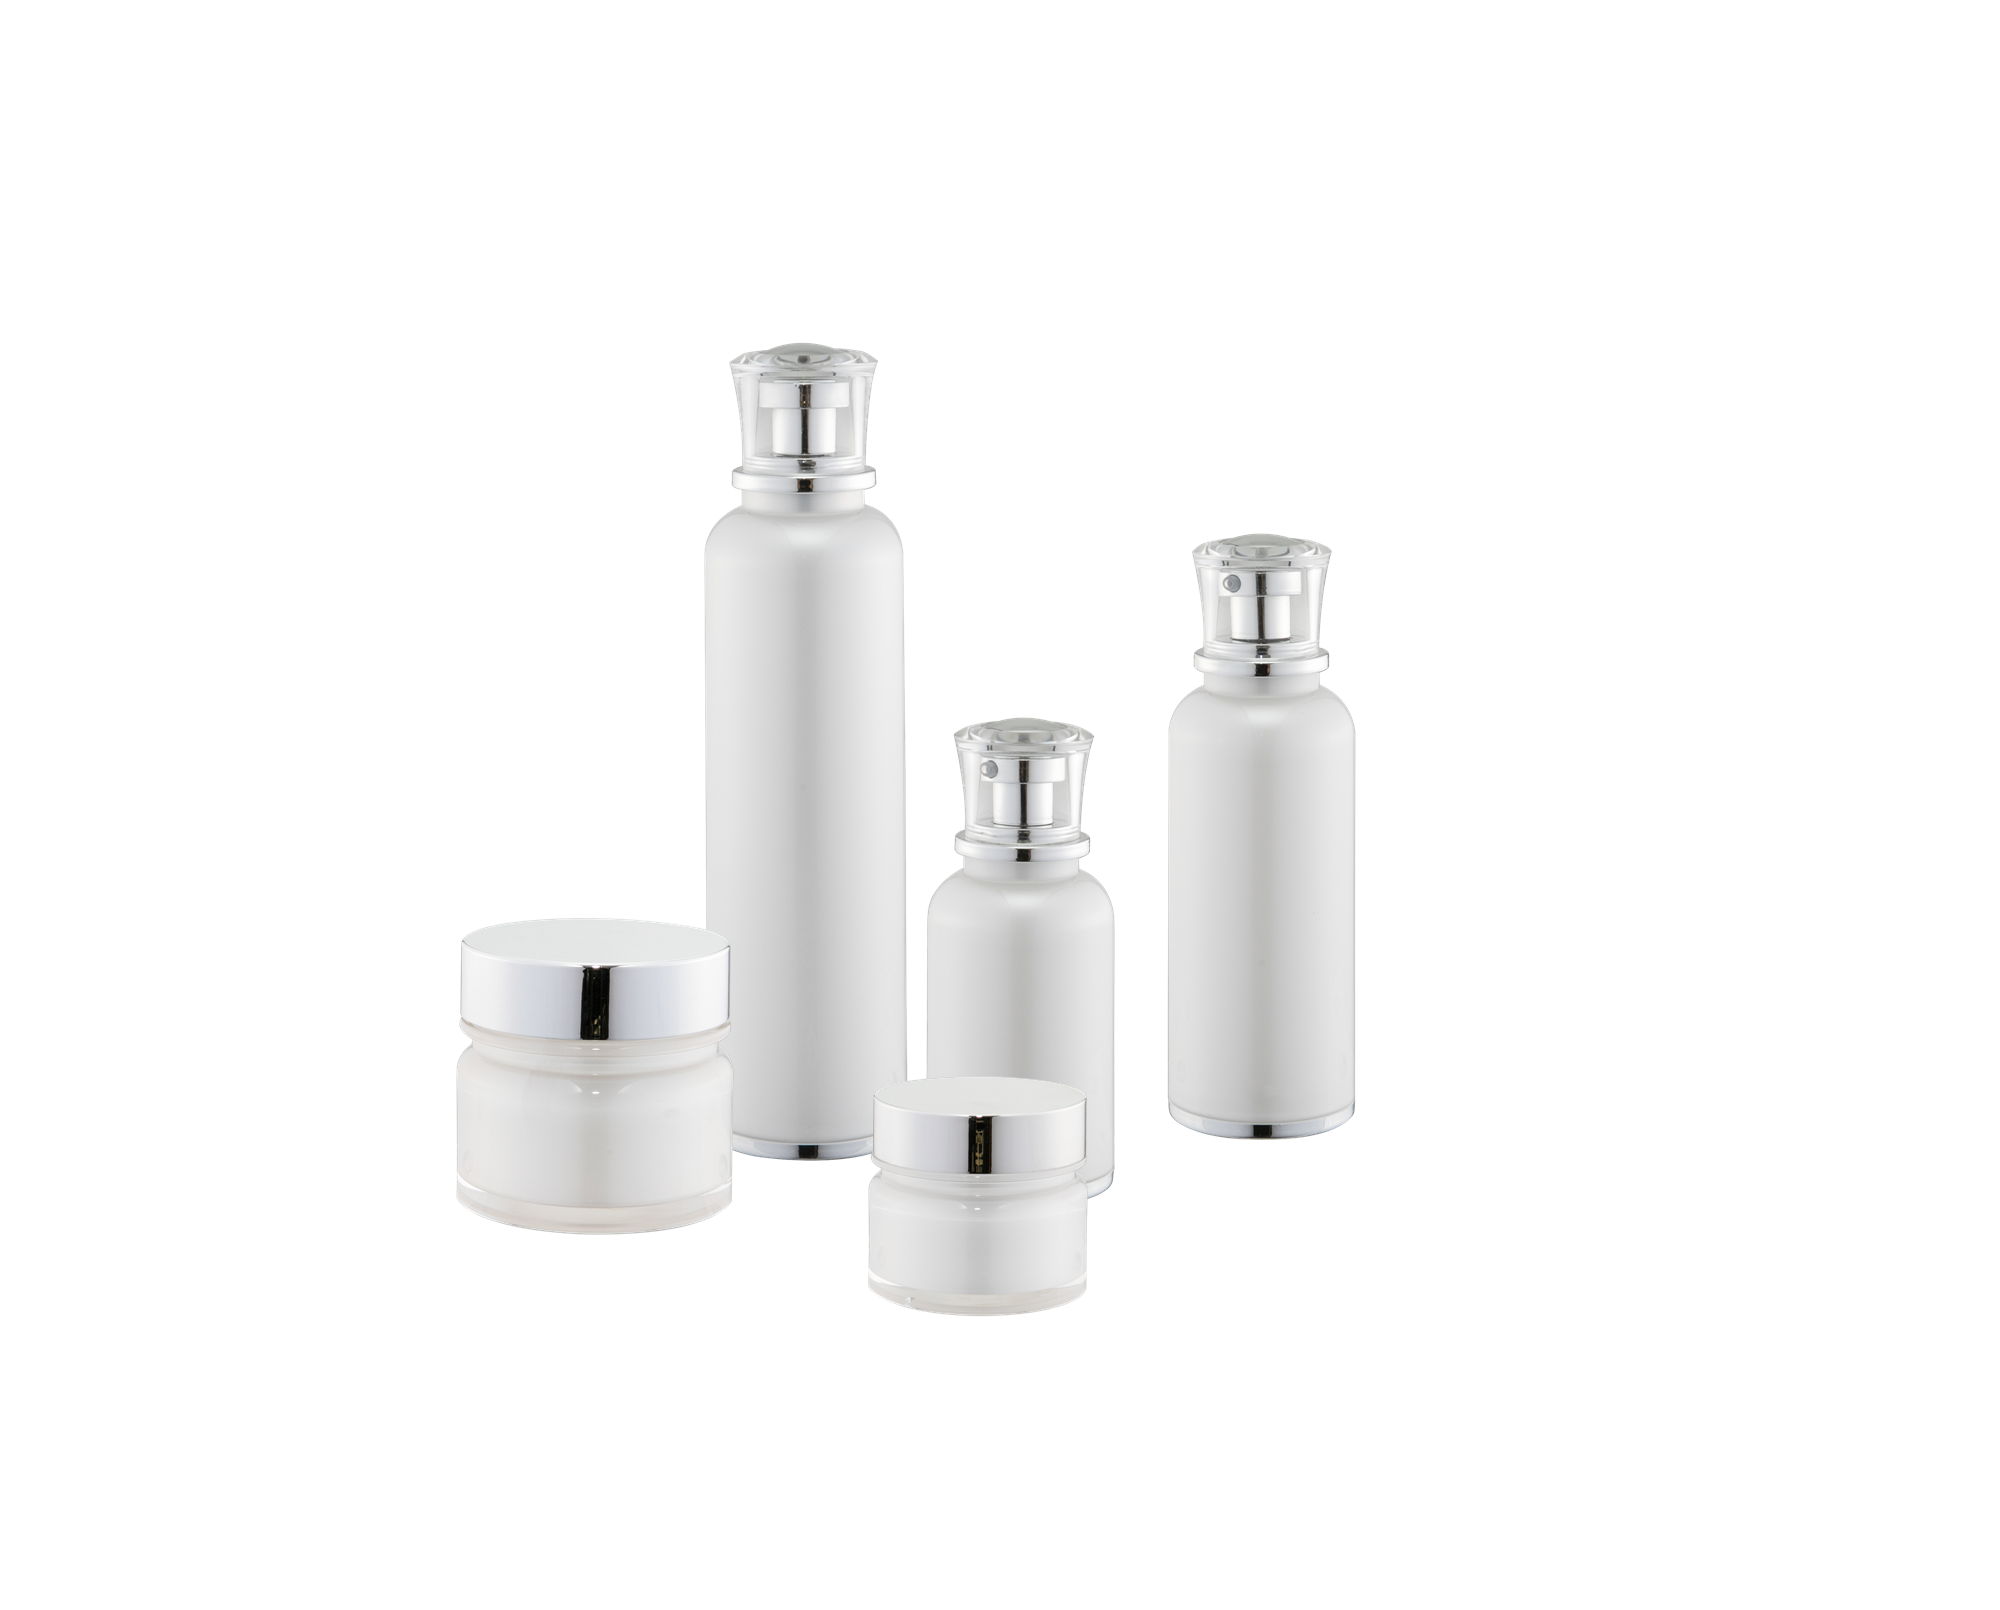 KR-4012 High class new arrival round cosmetic package acrylic lotion bottle and cream container jar 